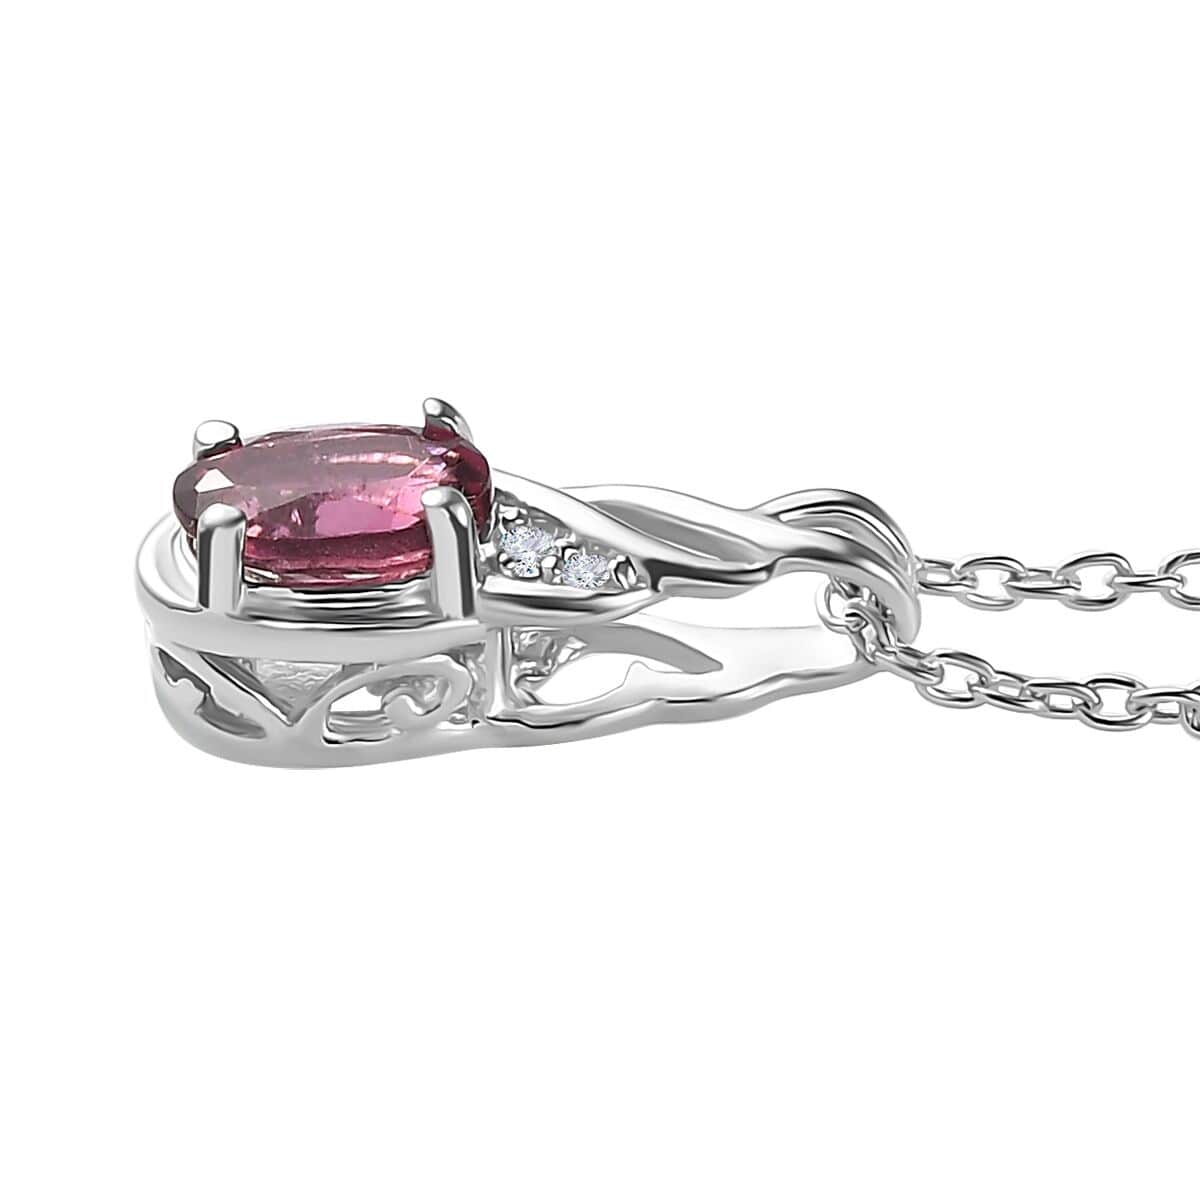 Ofiki Rubellite and Diamond Ring (Size 6.0) and Pendant Necklace 20 Inches in Platinum Over Sterling Silver 1.00 ctw (Del. in 8-10 Days) image number 7